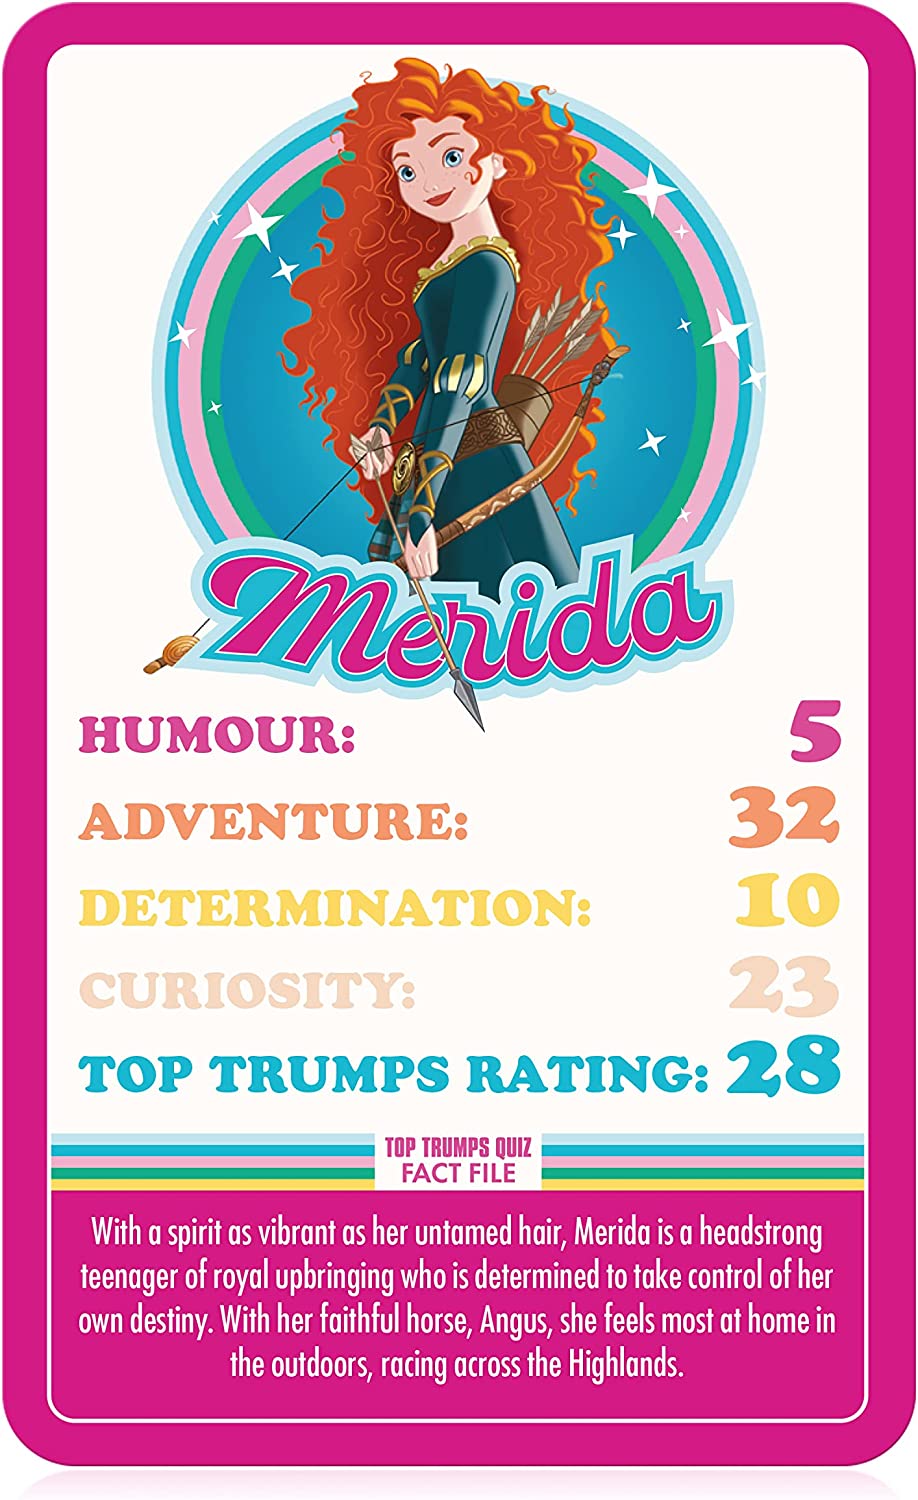 Disney Princess Top Trumps Specials Card English Edition, Play with Cinderella, Jasmine, Belle and Snow White battle your way to victory, Educational game for ages 6 up, Pink